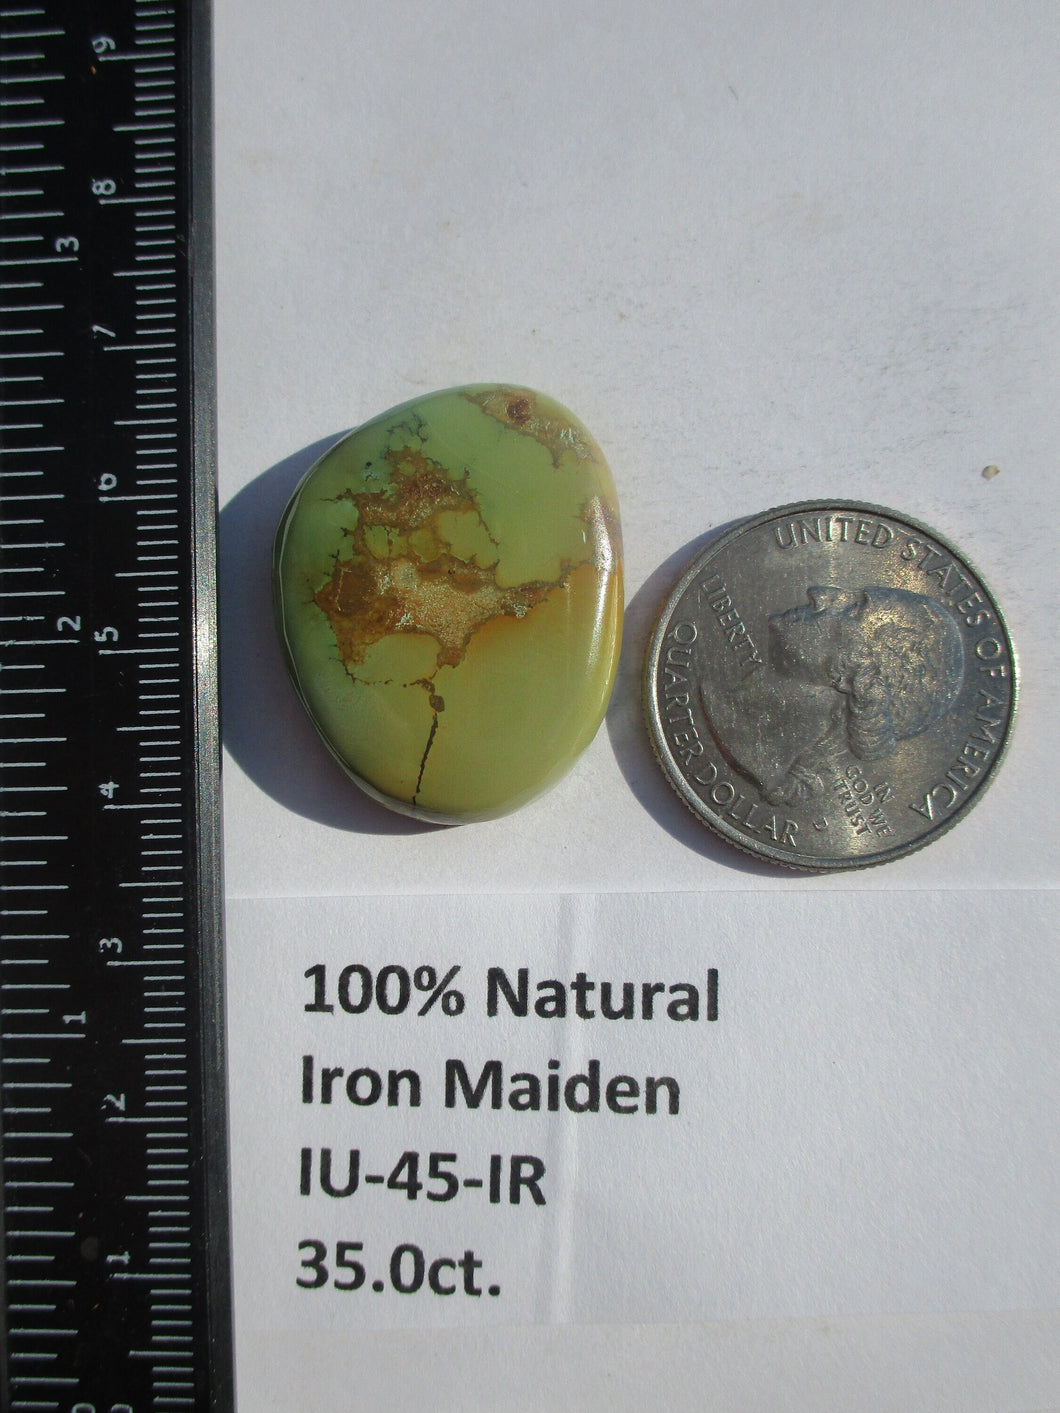 35.0 ct. (29x23x6 mm) 100% Natural Iron Maiden Turquoise Cabochon Gemstone, # IU 45